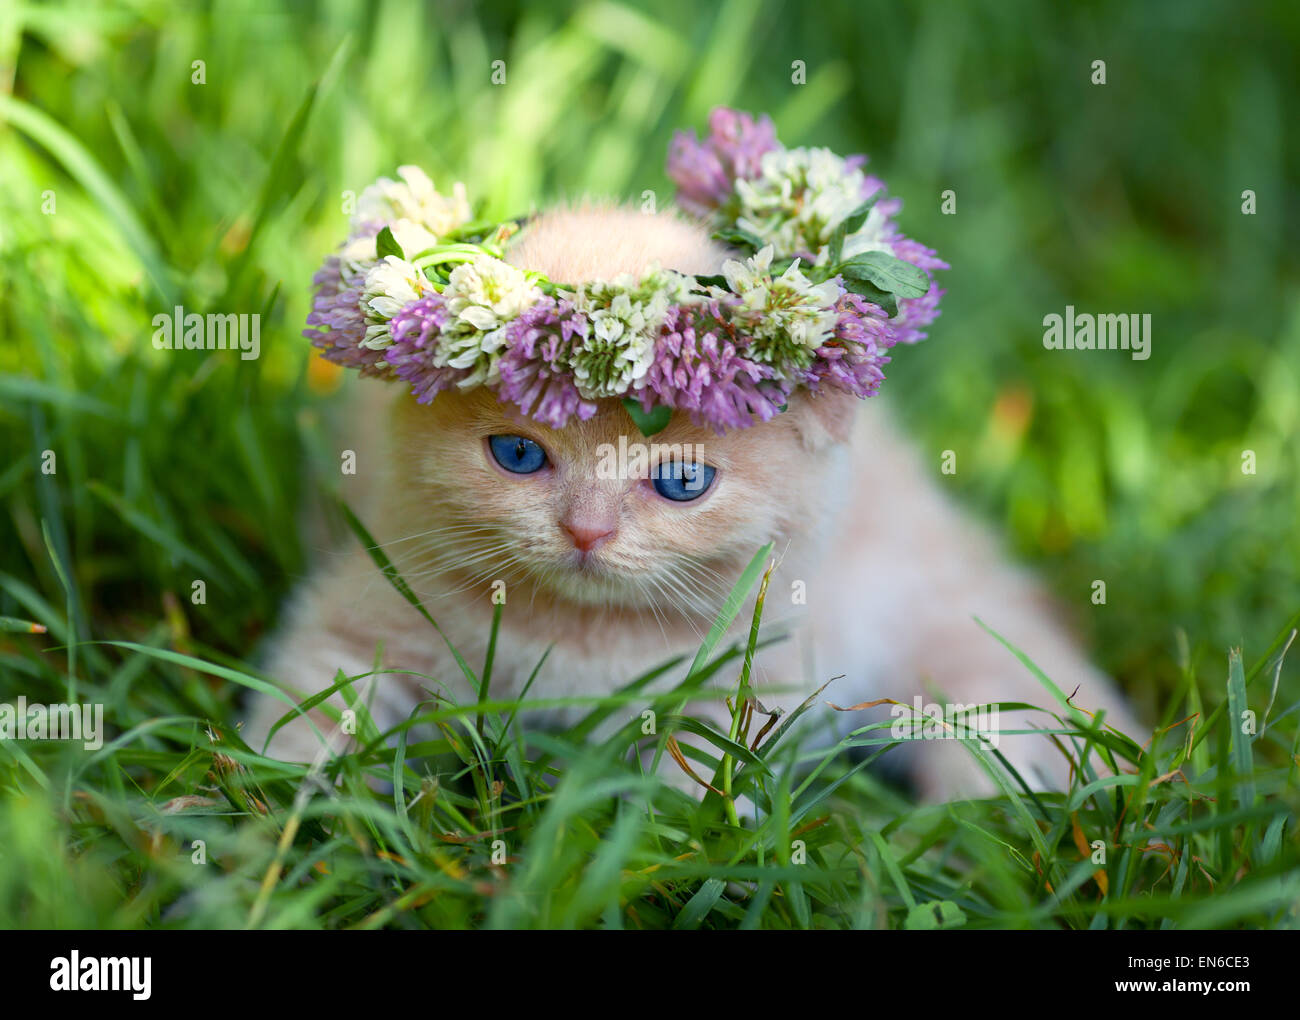 Cute little kitten crowned with a flower chaplet sits on the grass Stock Photo